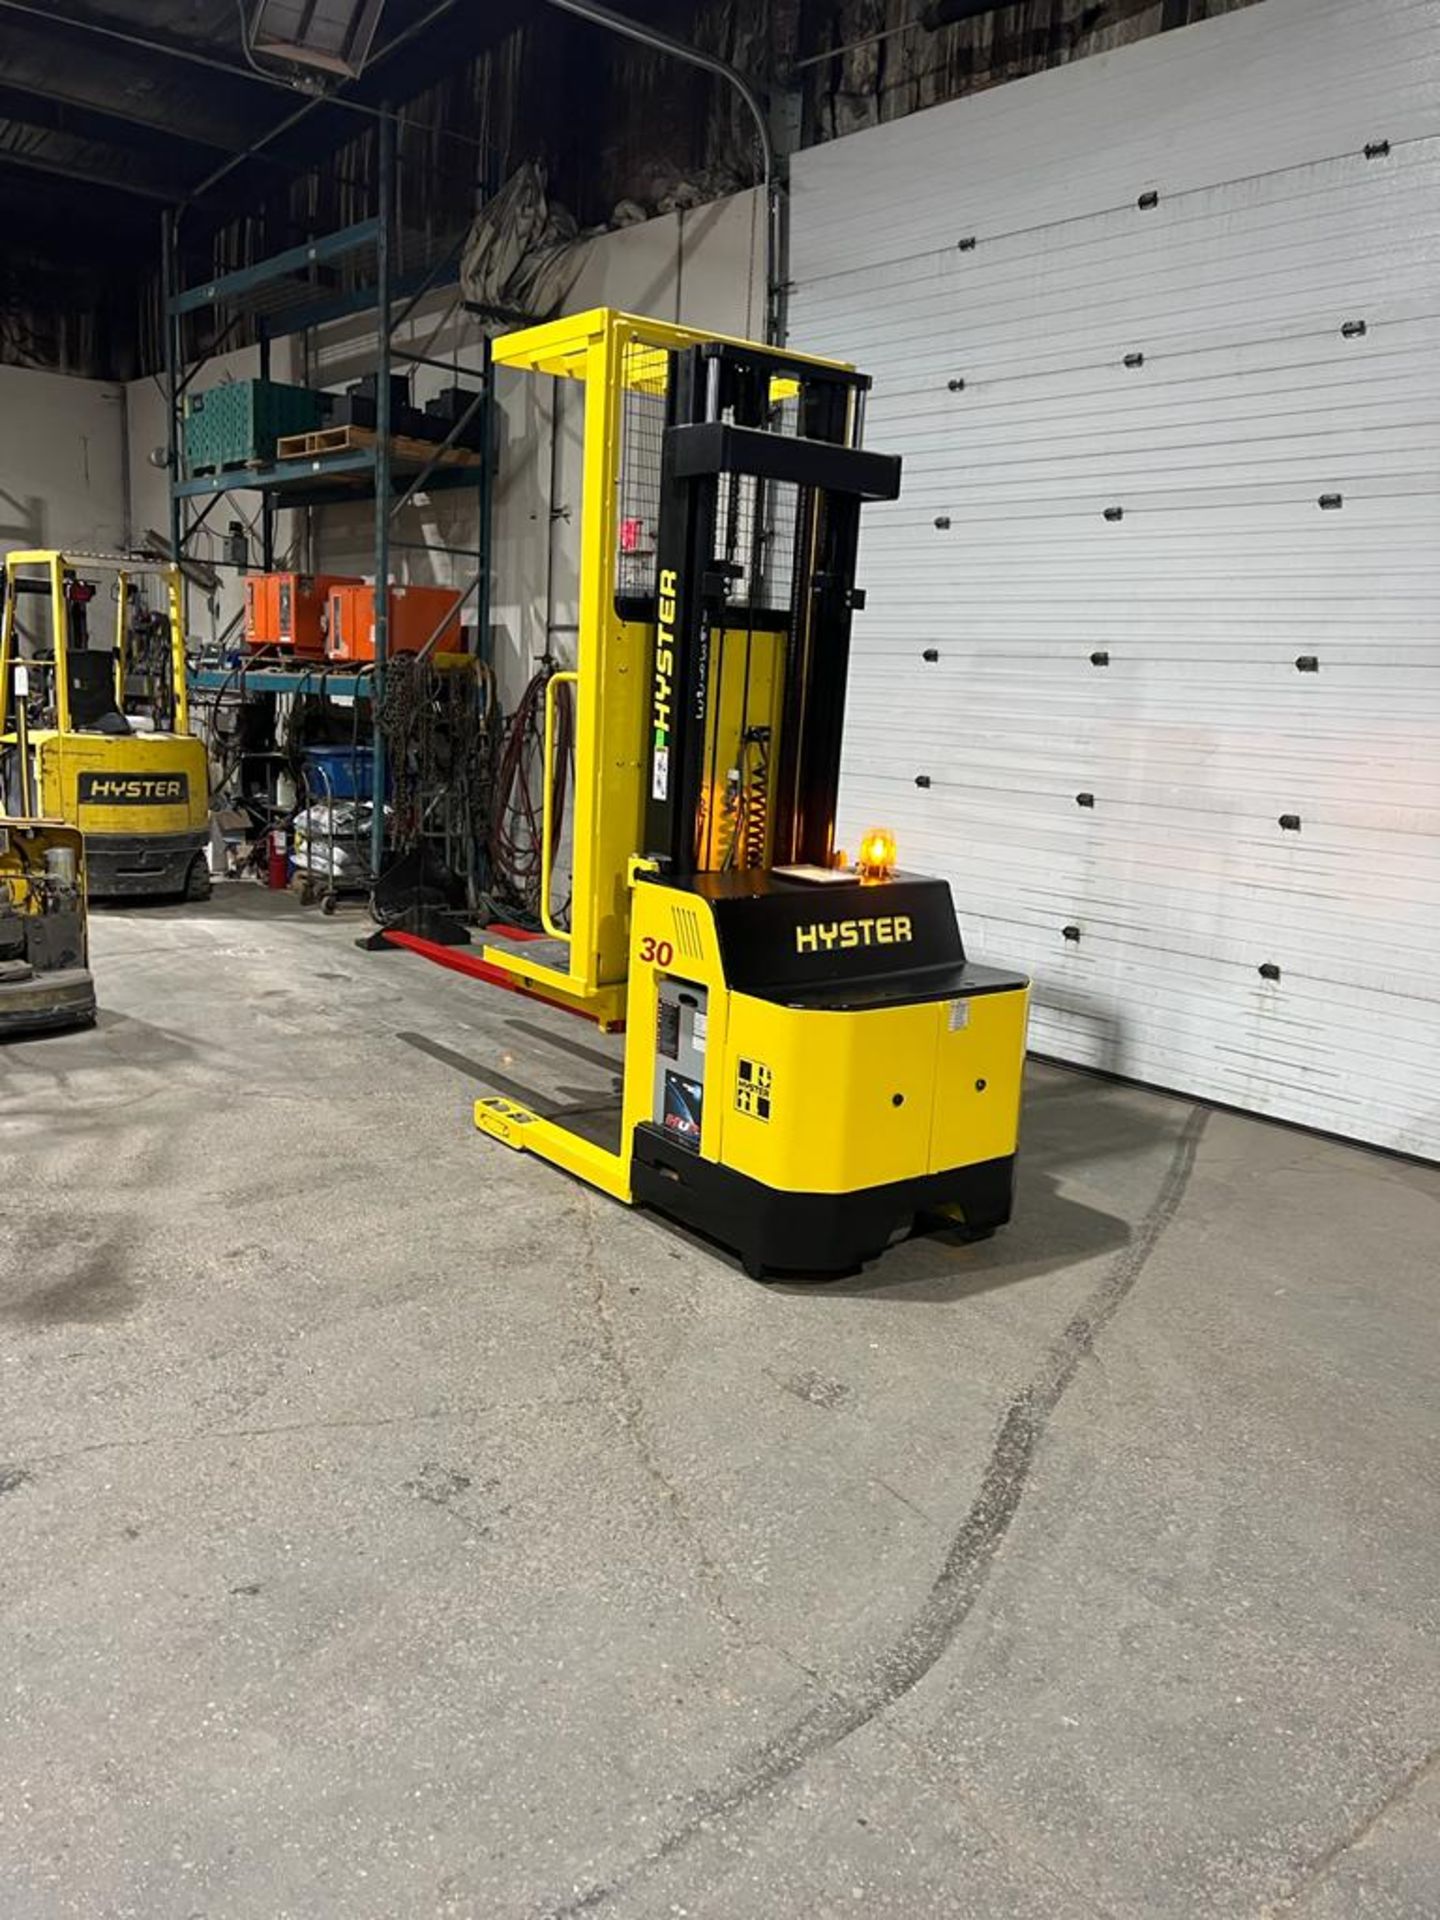 2015 Hyster Order Picker 3000lbs capacity electric Powered Pallet Cart 24V battery - FREE CUSTOMS - Image 3 of 4